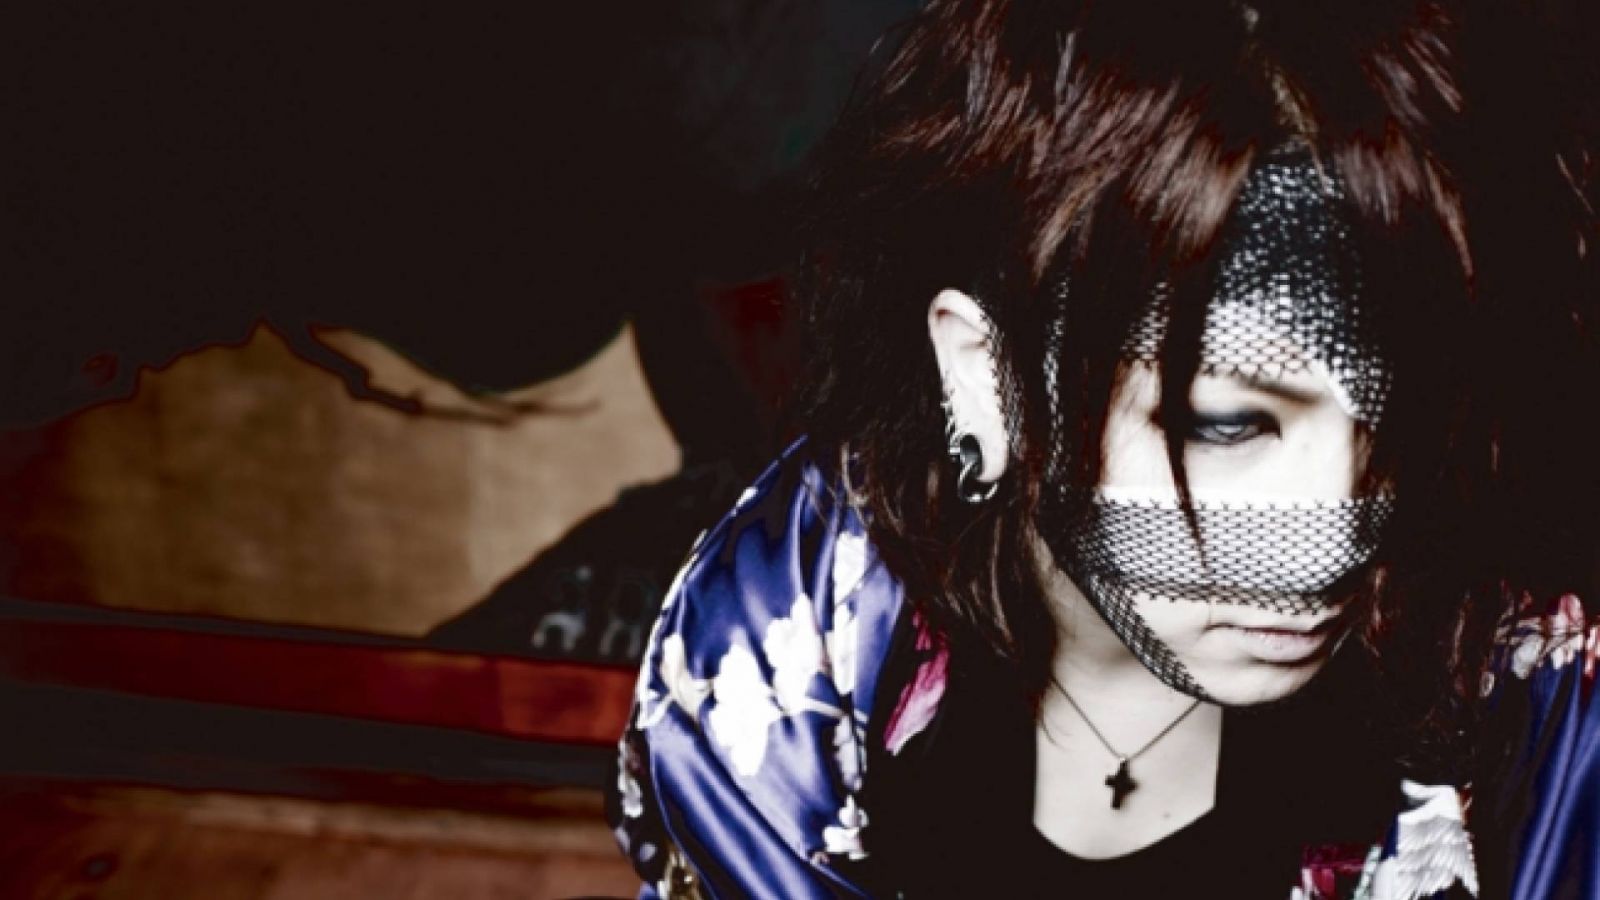 Zy 50: Ruki (the GazettE) © 2010 Zy.connection Inc. All Rights Reserved.